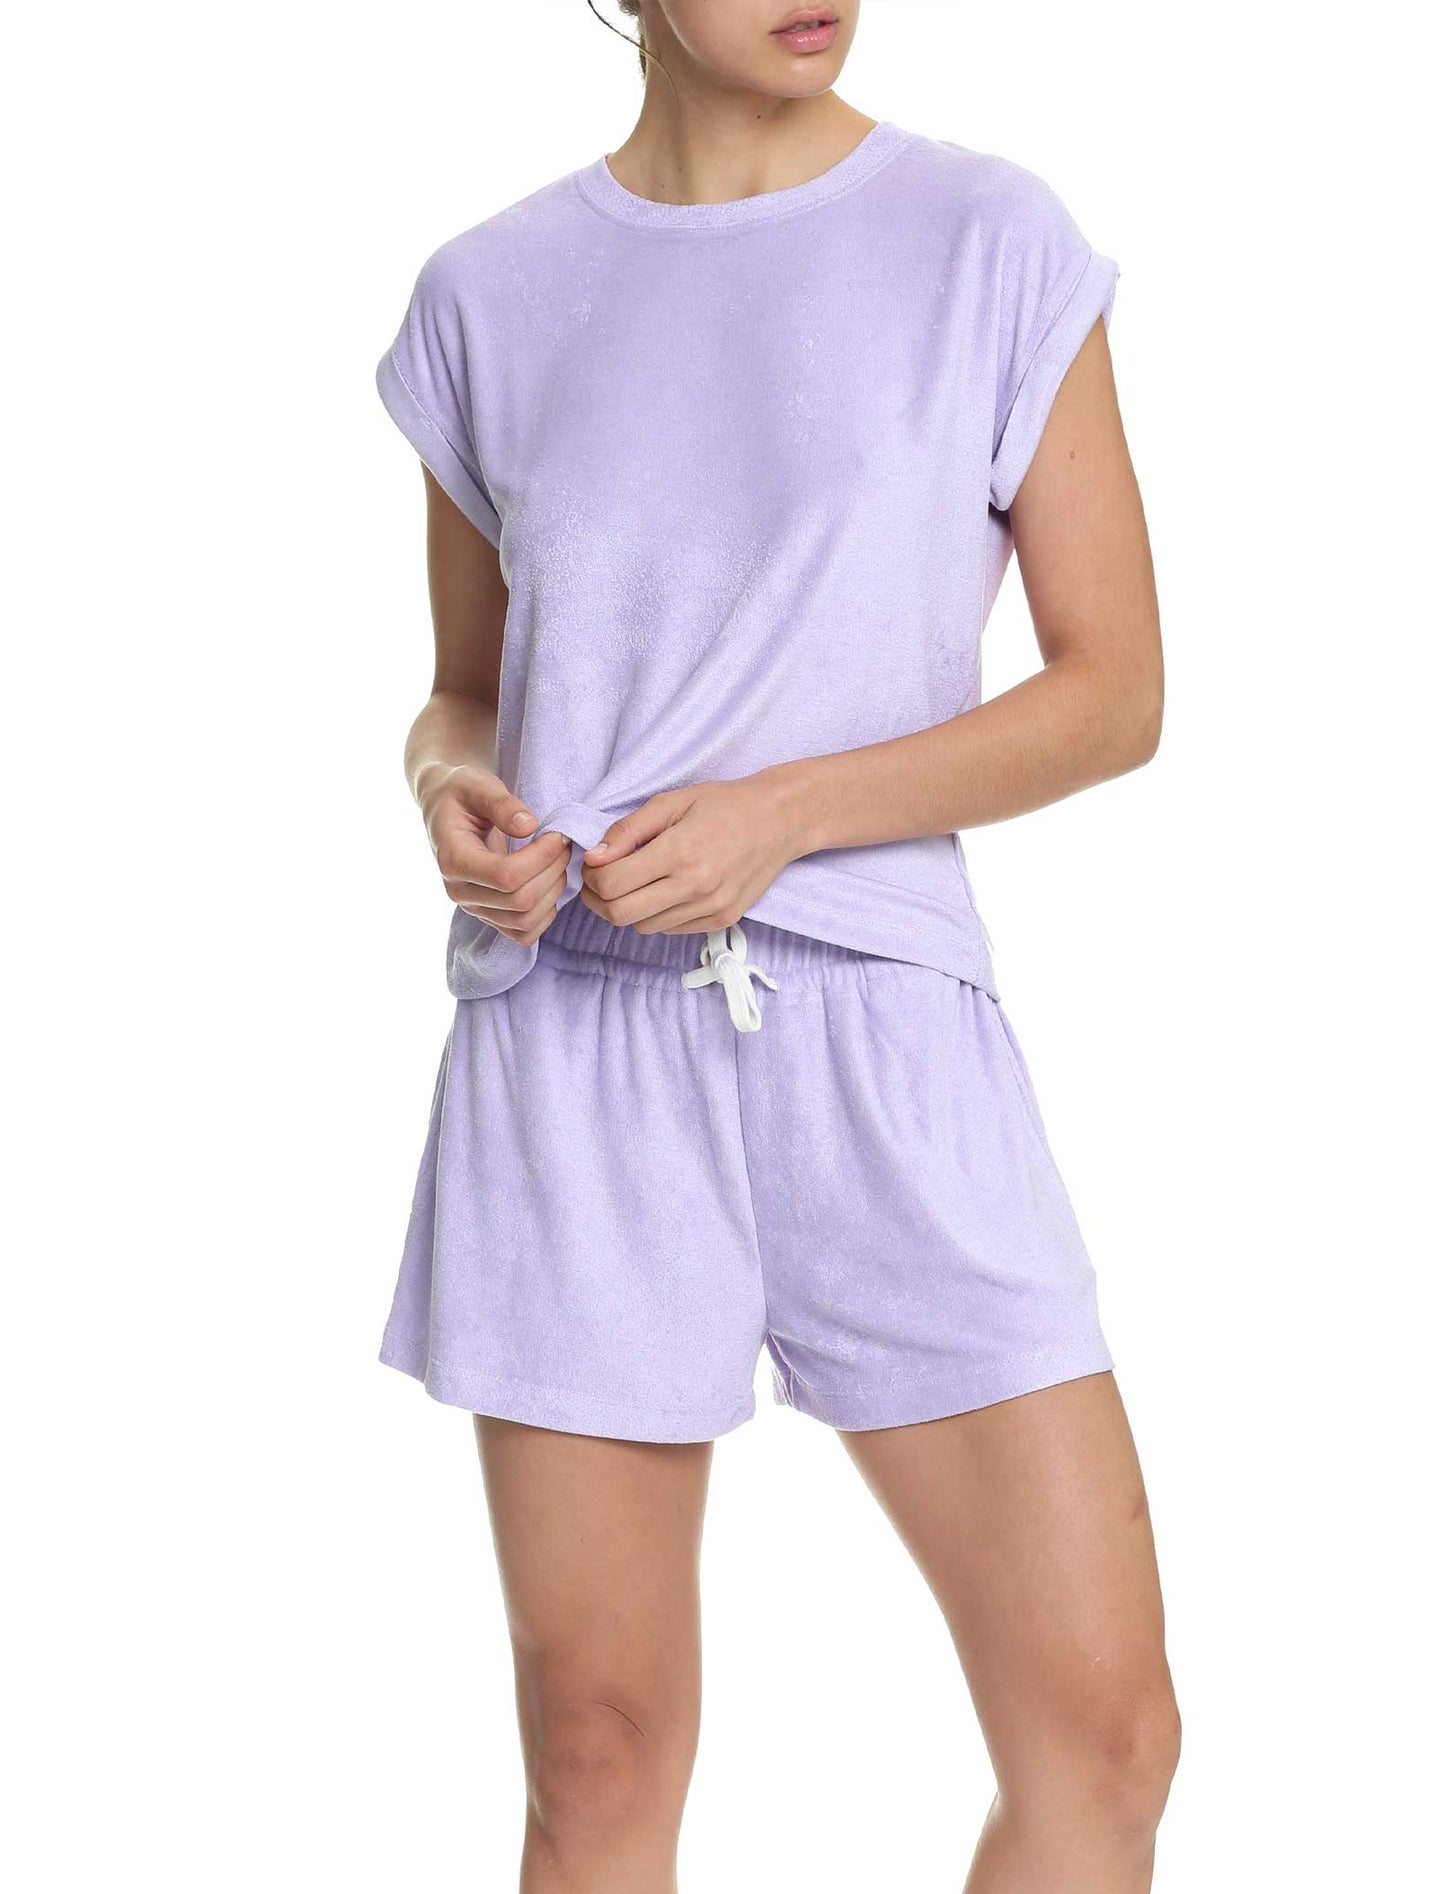 French Terry Boxer in Lilac